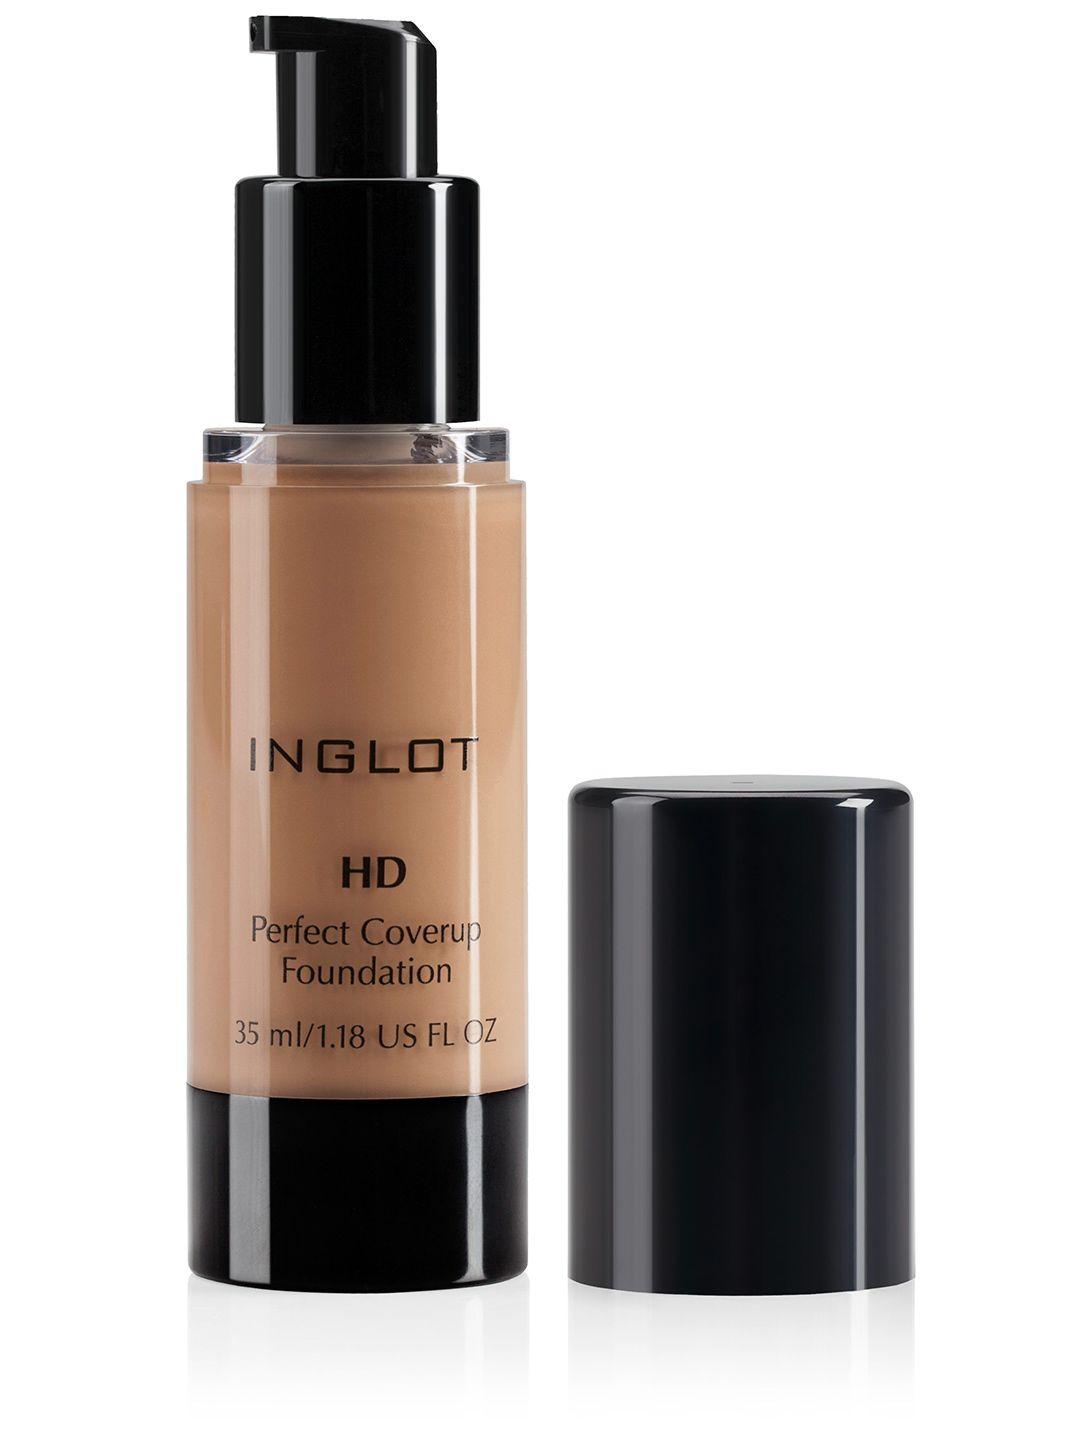 inglot hd perfect coverup foundation 35ml - nude mw 77